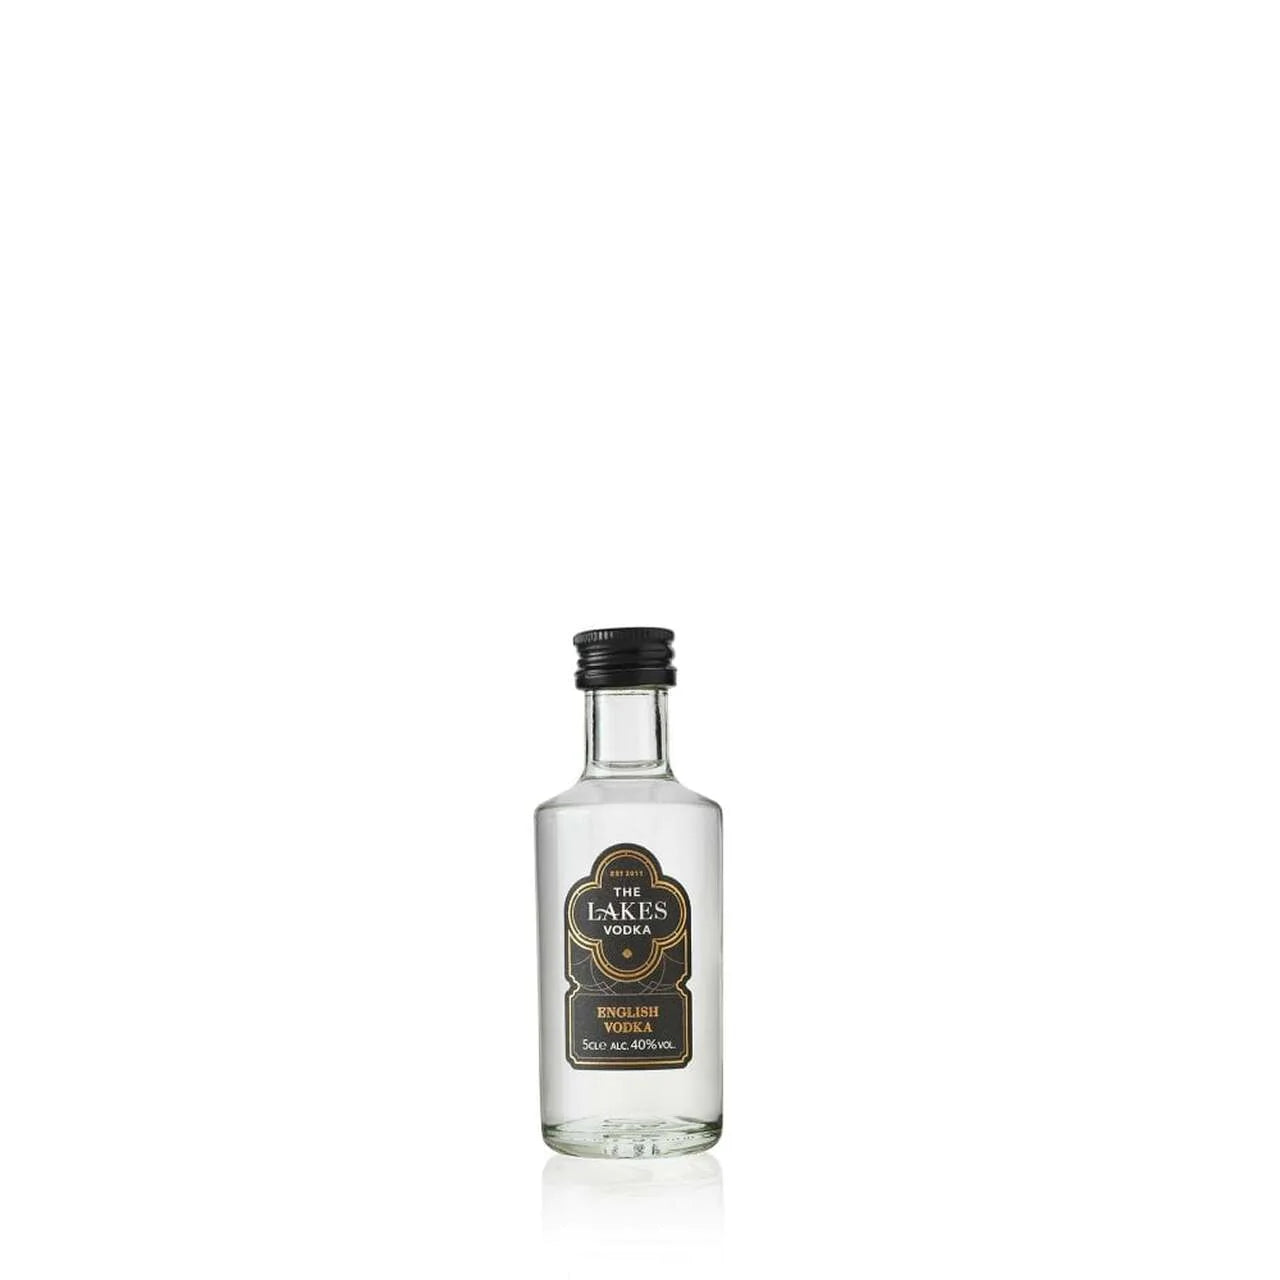 The Lakes Distillery - Lakes Distillery 5cl Miniatures (9 flavours)